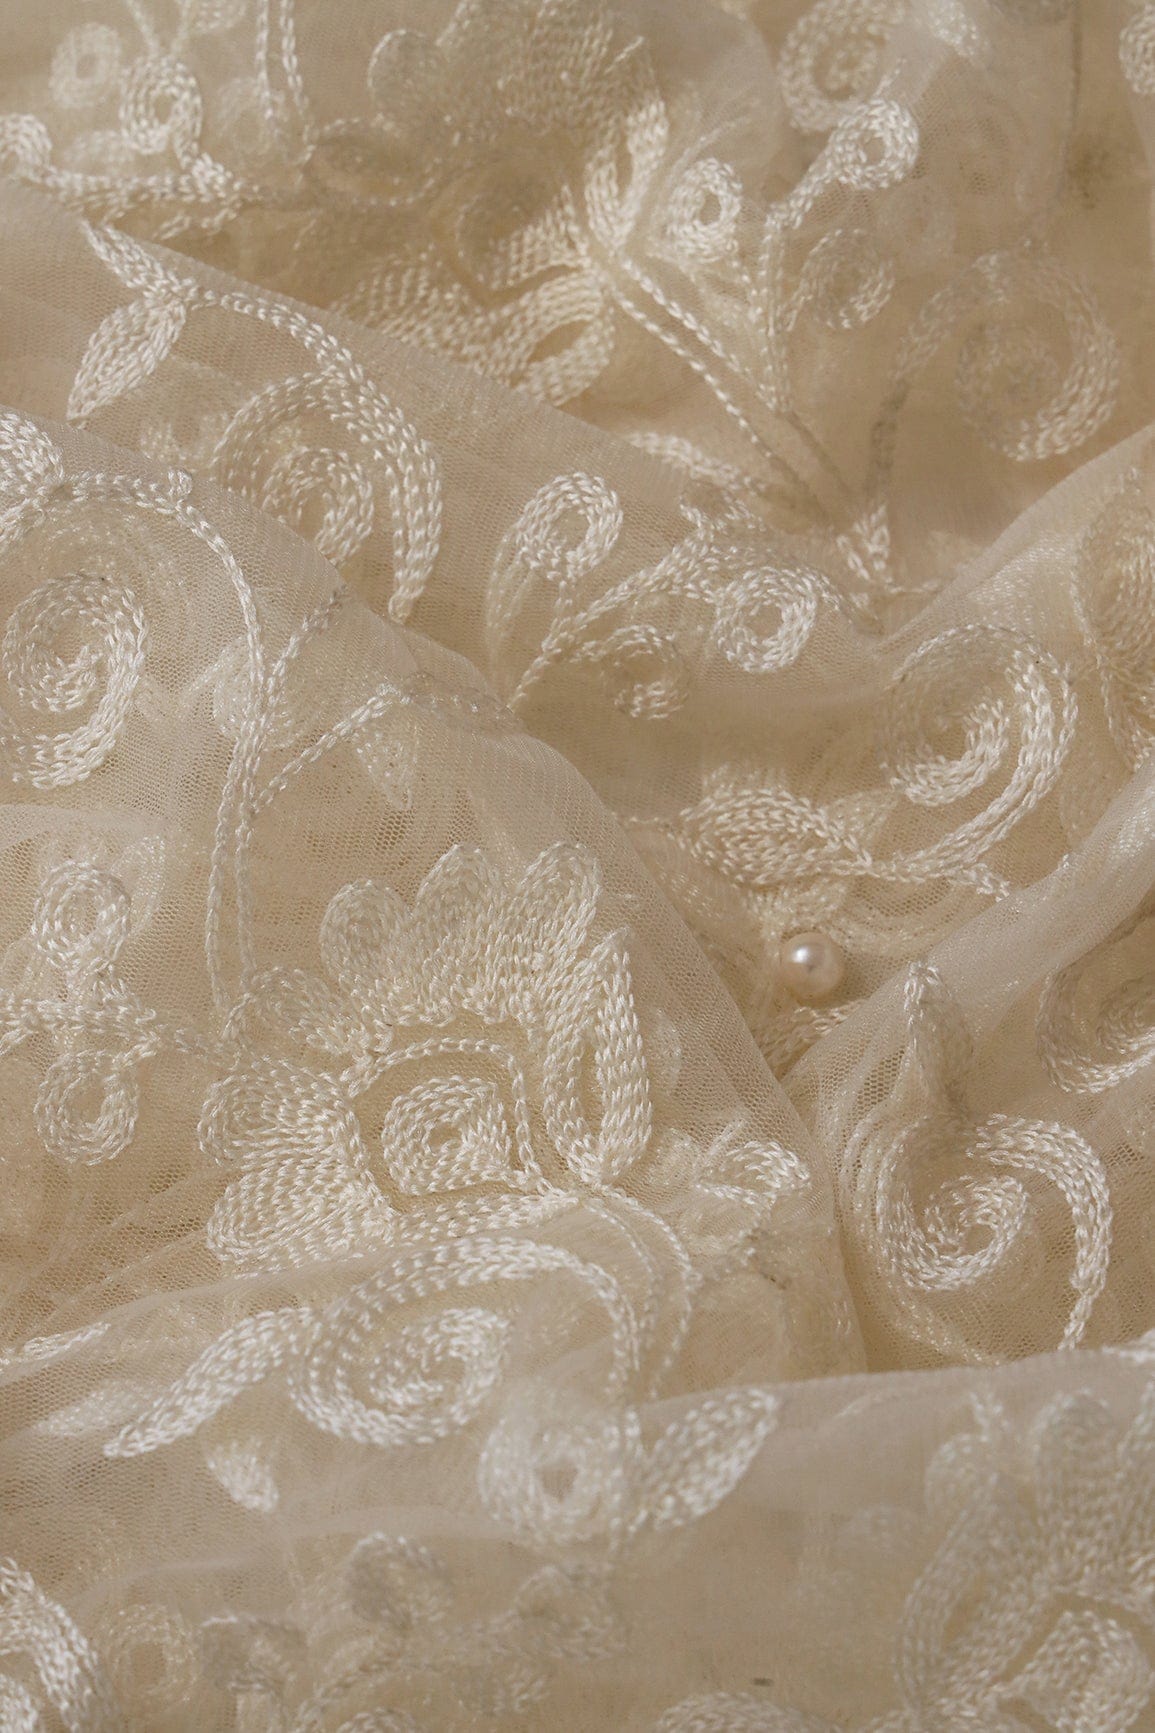 doeraa Embroidery Fabrics Cream Thread Beautiful Heavy Floral Embroidery Work On White Soft Net Fabric